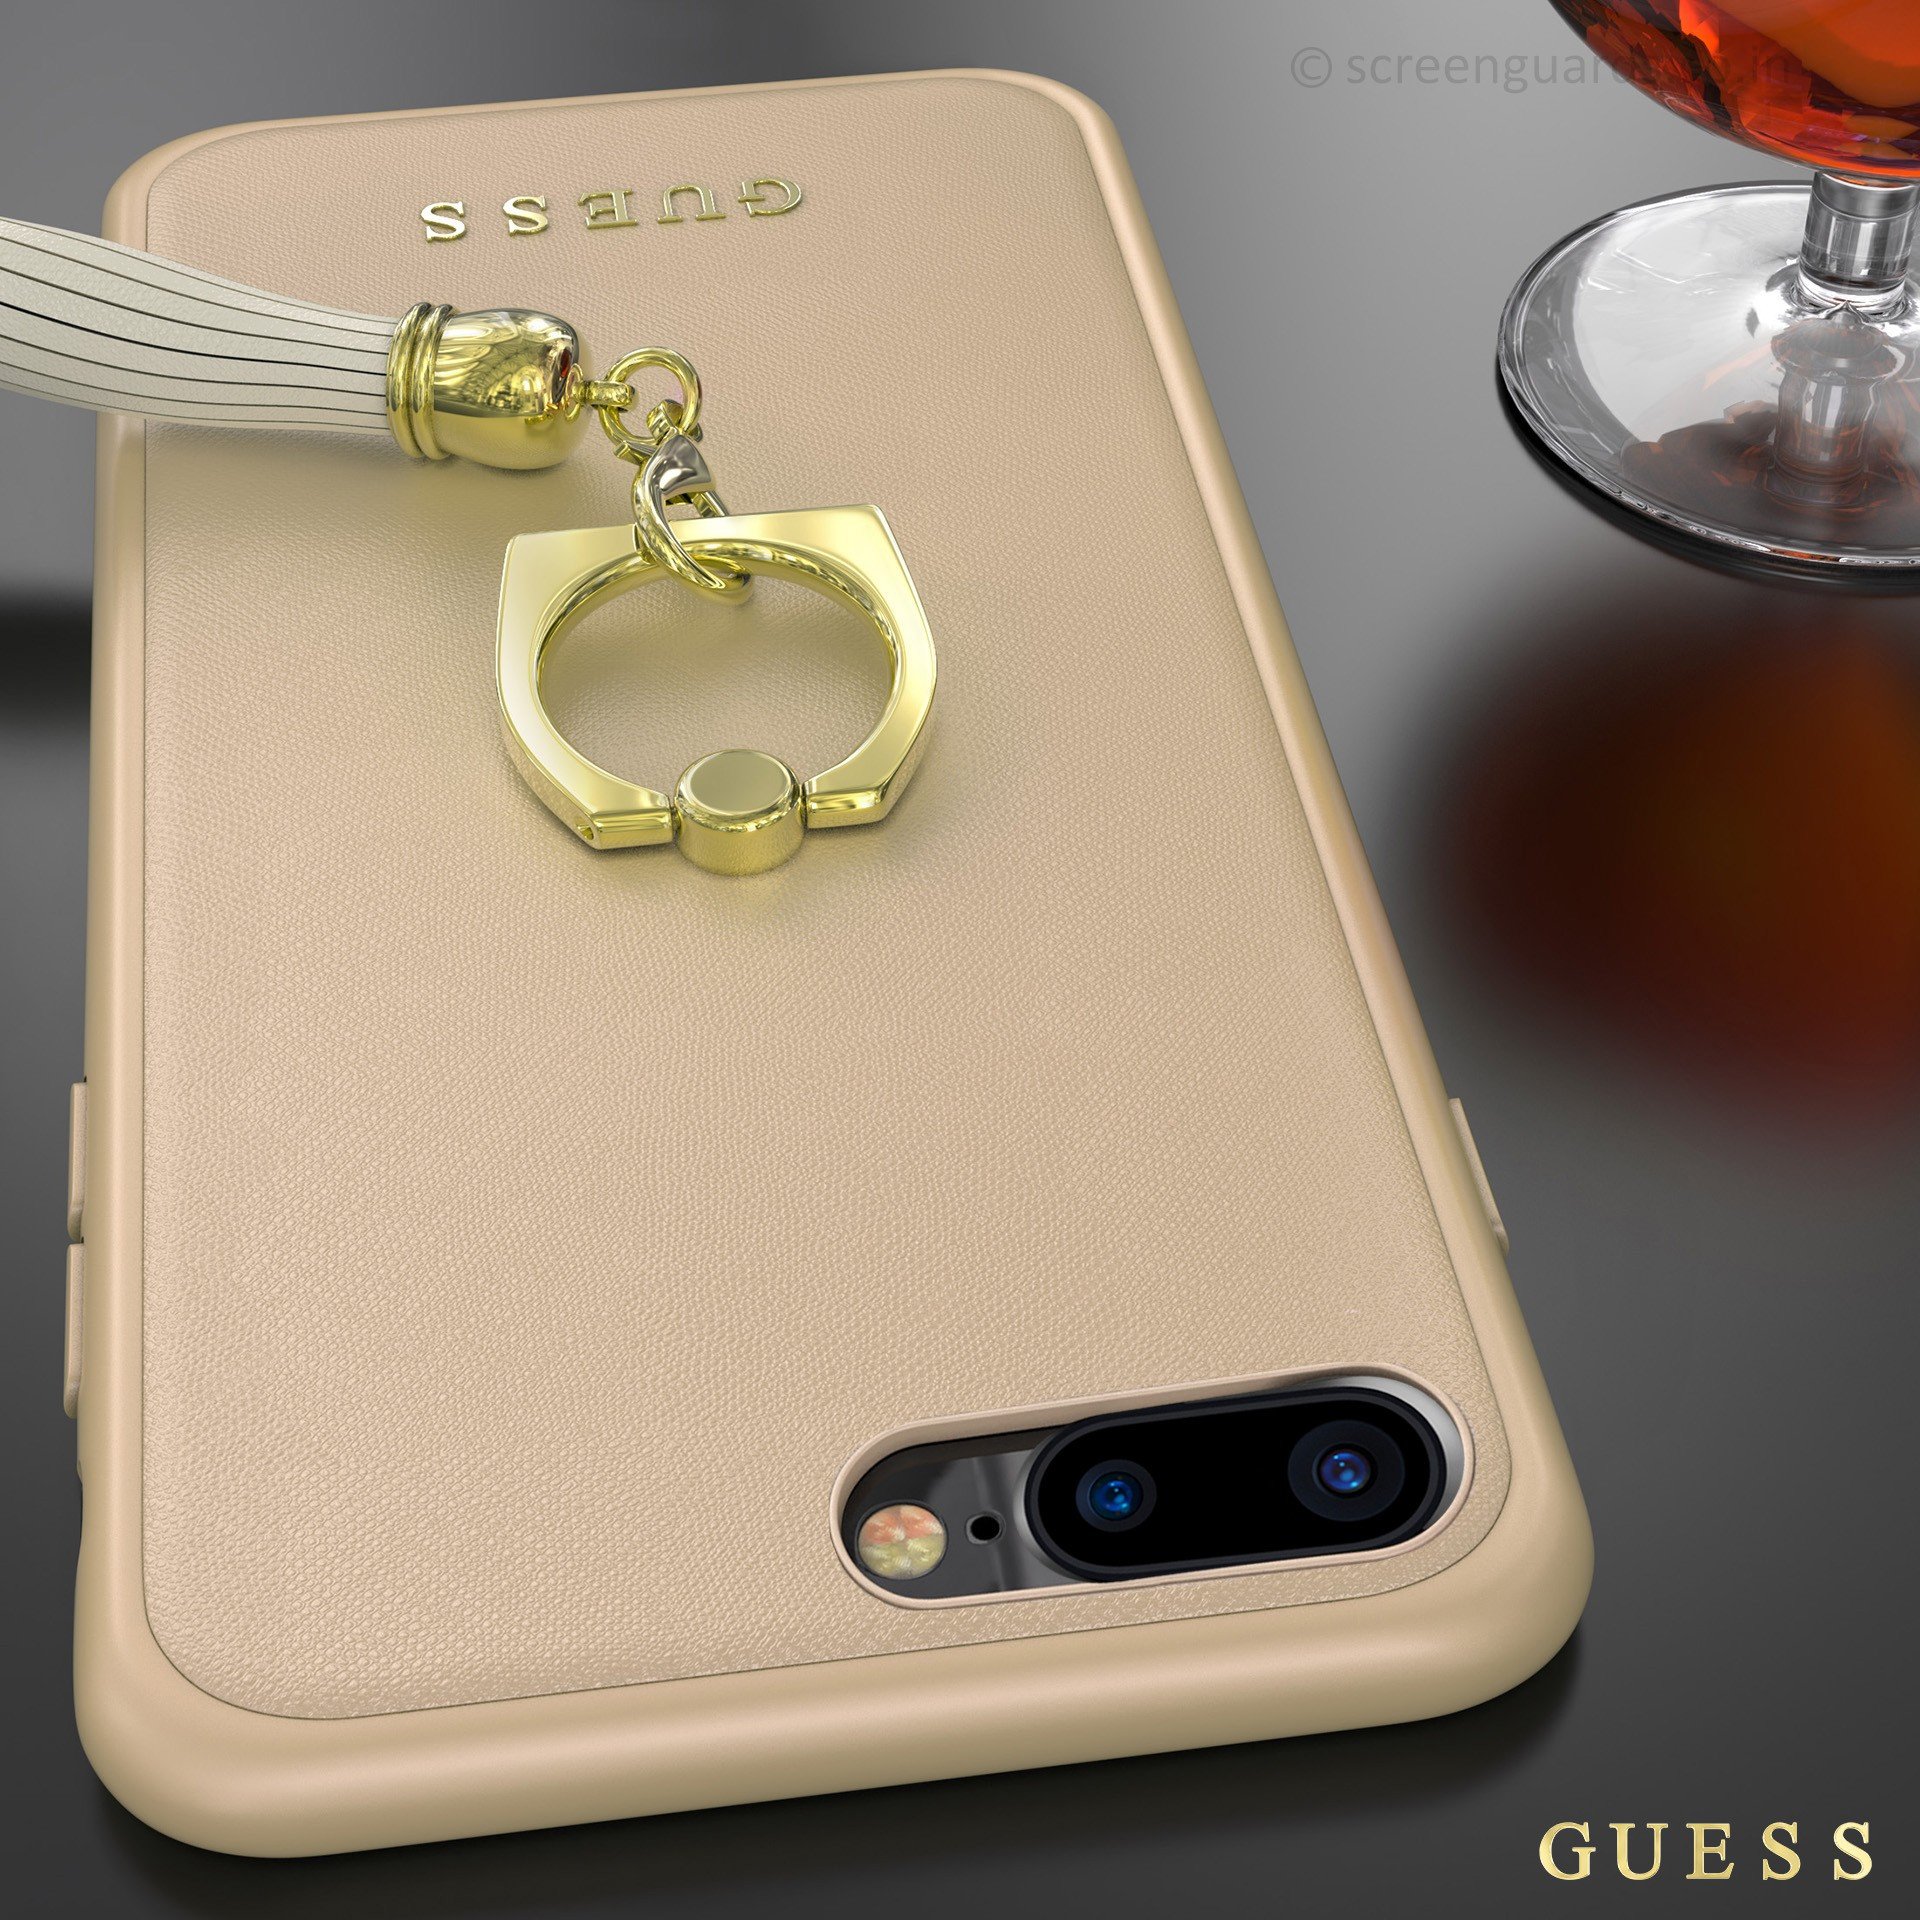 Ongedaan maken Ik heb een Engelse les herhaling GUESS ® Apple iPhone 8 plus Premium Luther Leather 2K Gold Electroplated +  inbuilt ring stand + detachable Tassels Back Case - iPhone 8 Plus - Apple -  Mobile / Tablet - Luxurious Covers